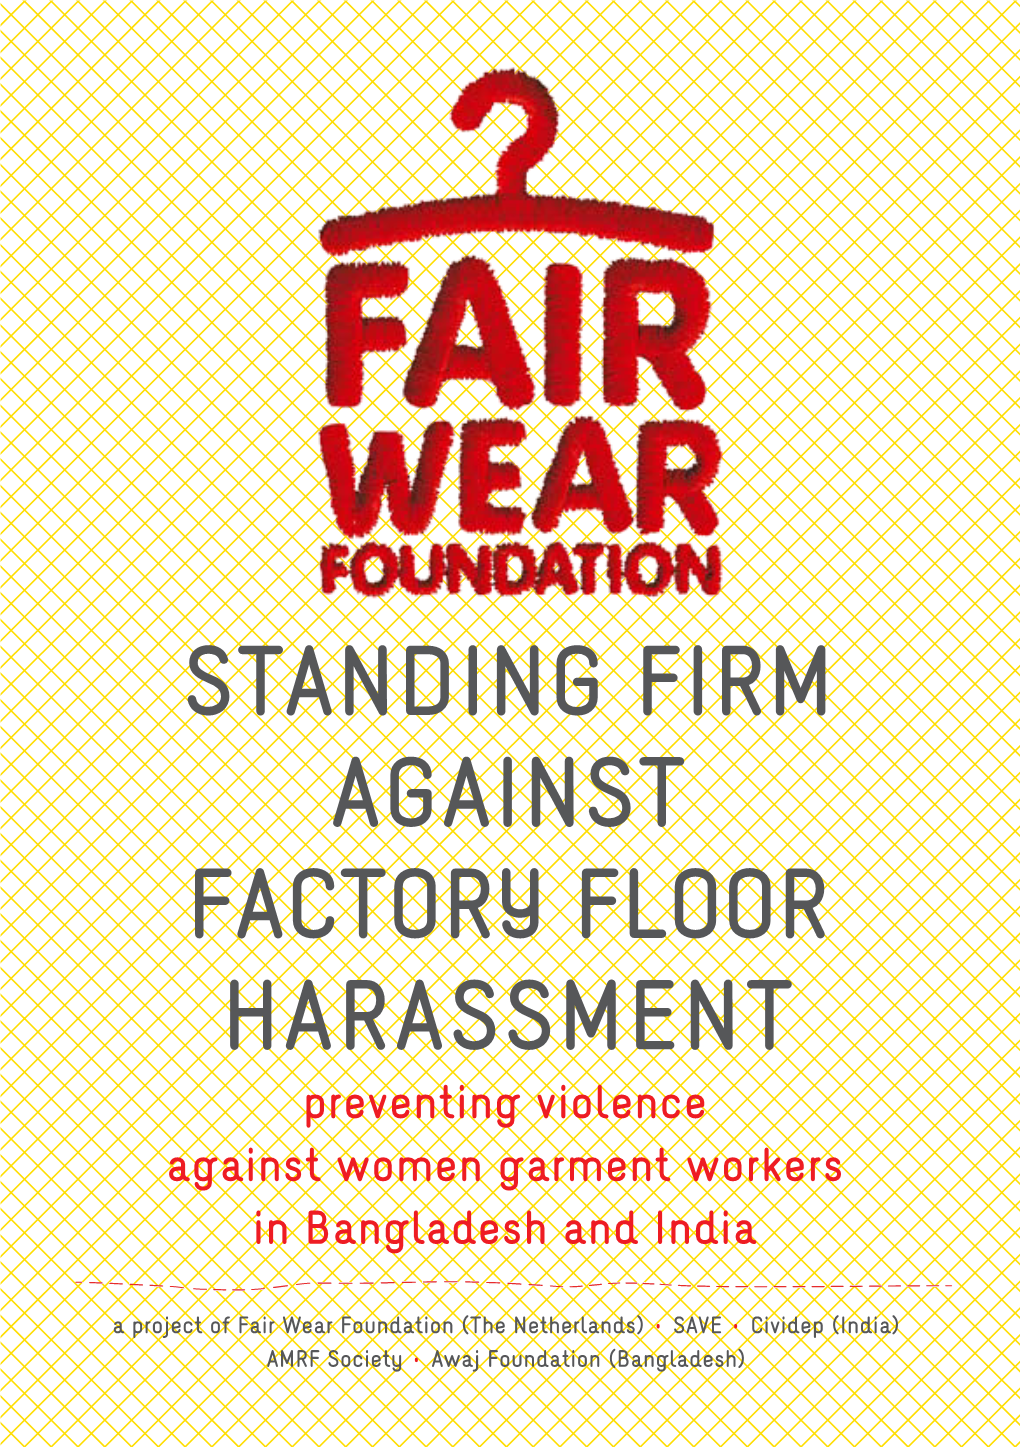 STANDING FIRM AGAINST FACTORY FLOOR HARASSMENT Preventing Violence Against Women Garment Workers in Bangladesh and India